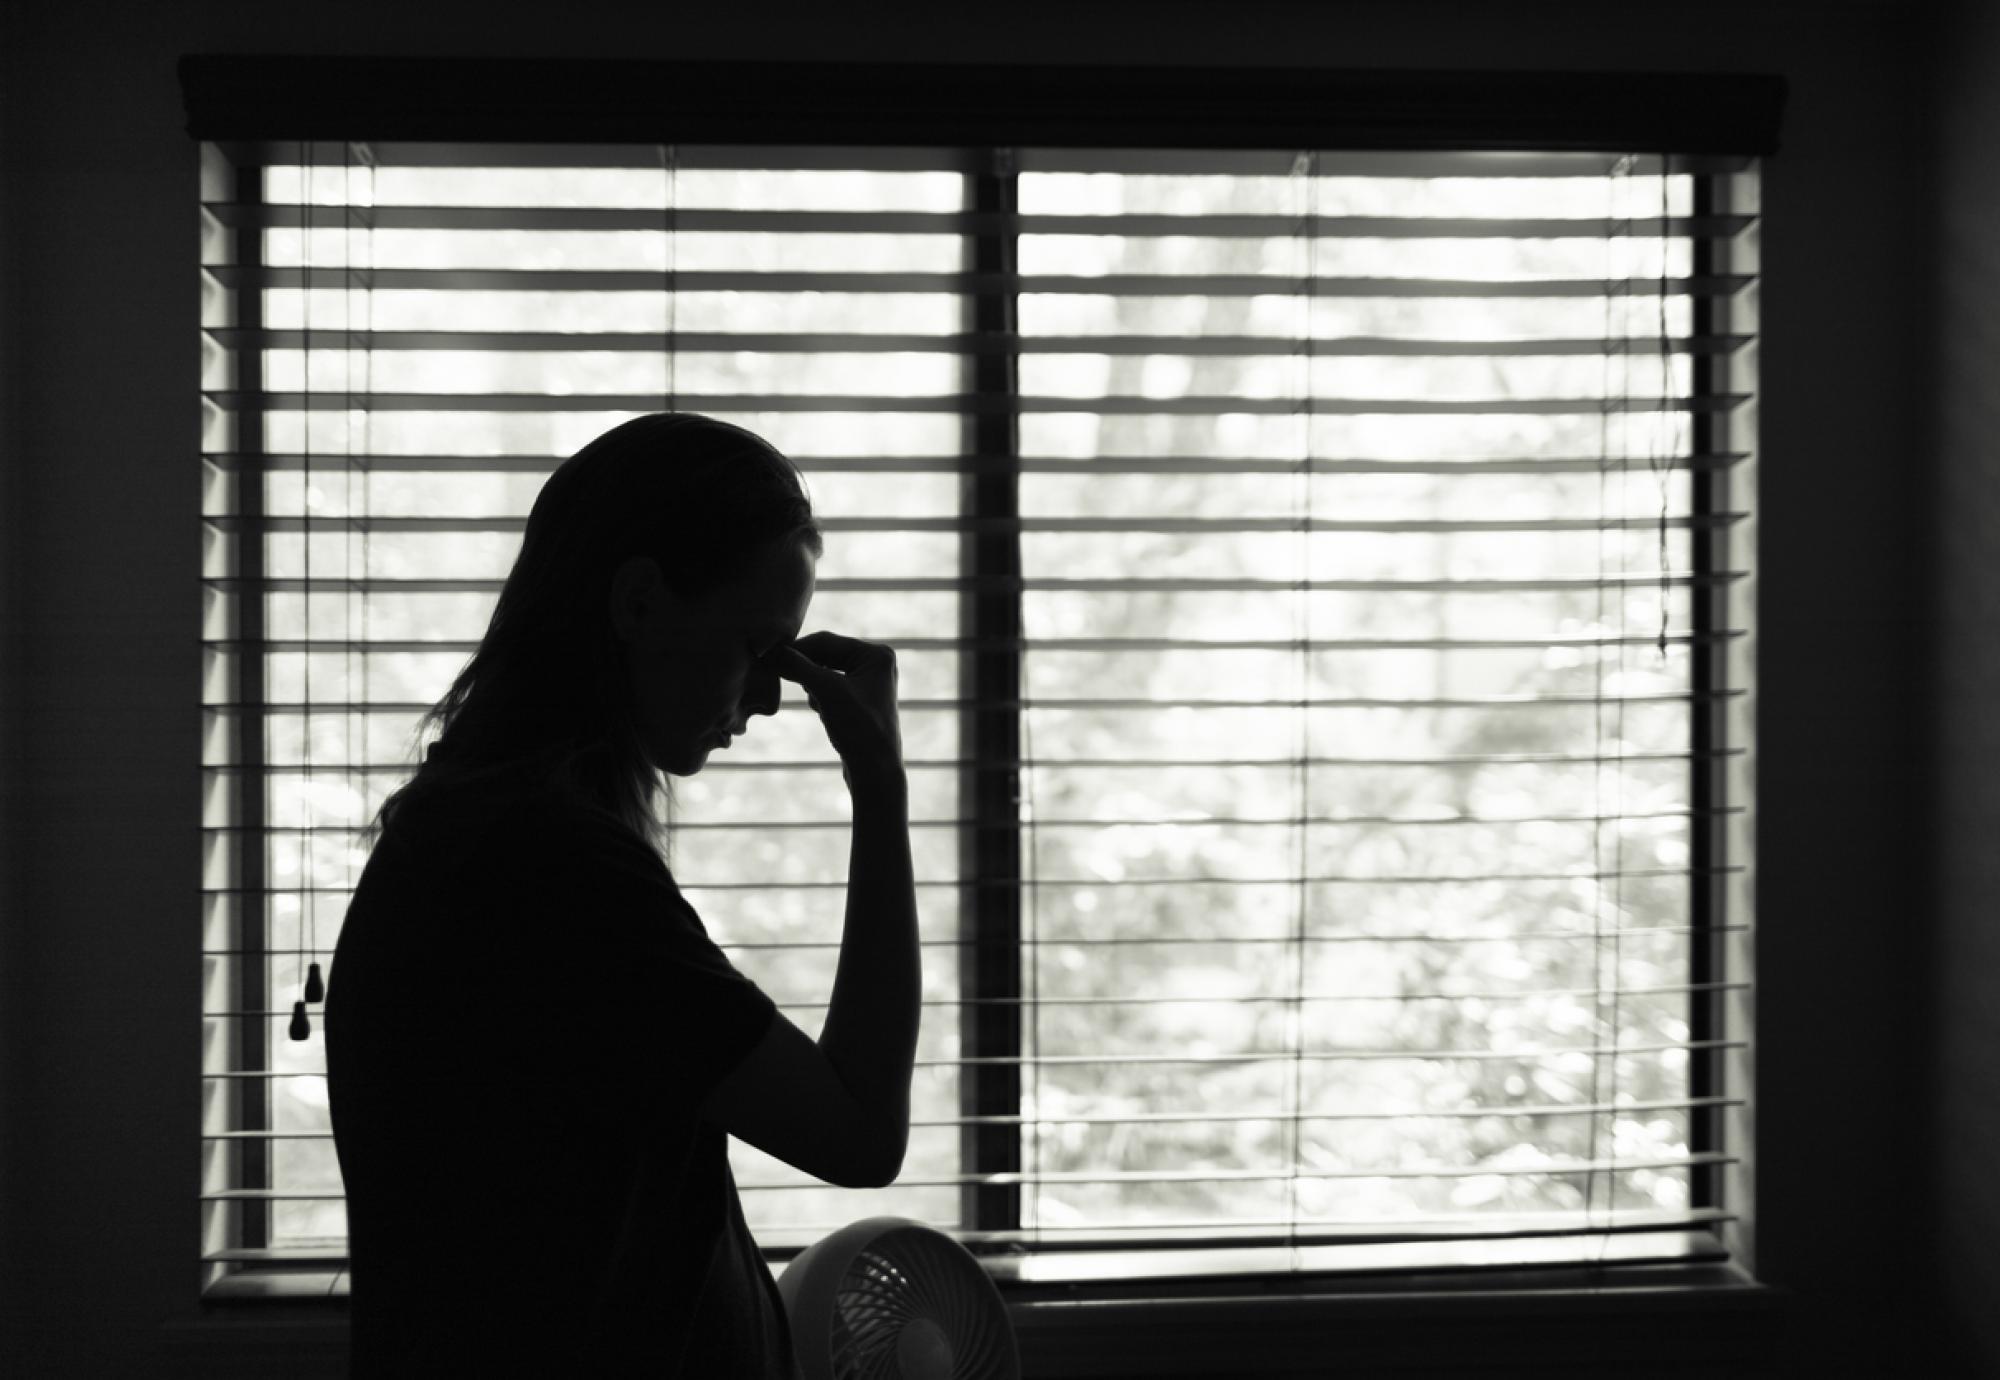 Silhouette of woman looking sad